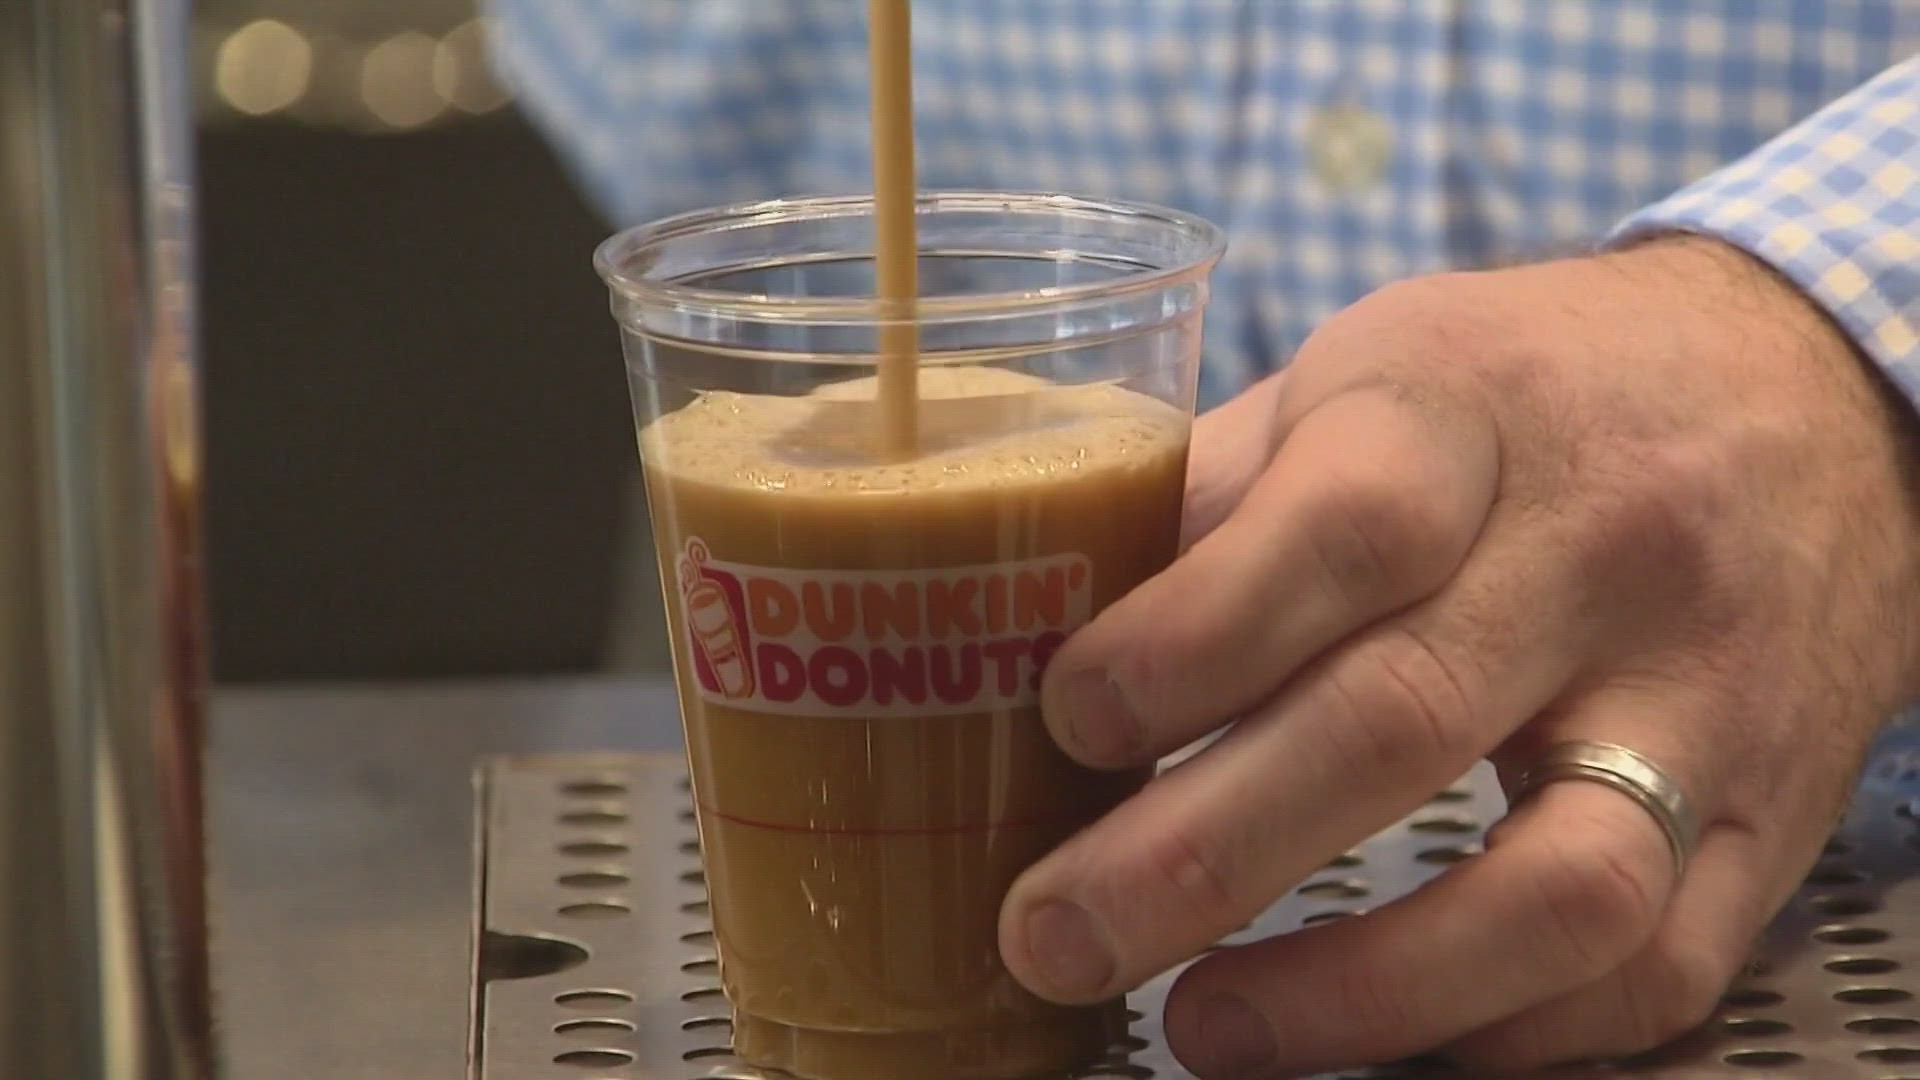 Tuesday is Dunkin' Iced Coffee Day. One dollar from each iced coffee sold will go into the Dunkin' Joy in Childhood Foundation.